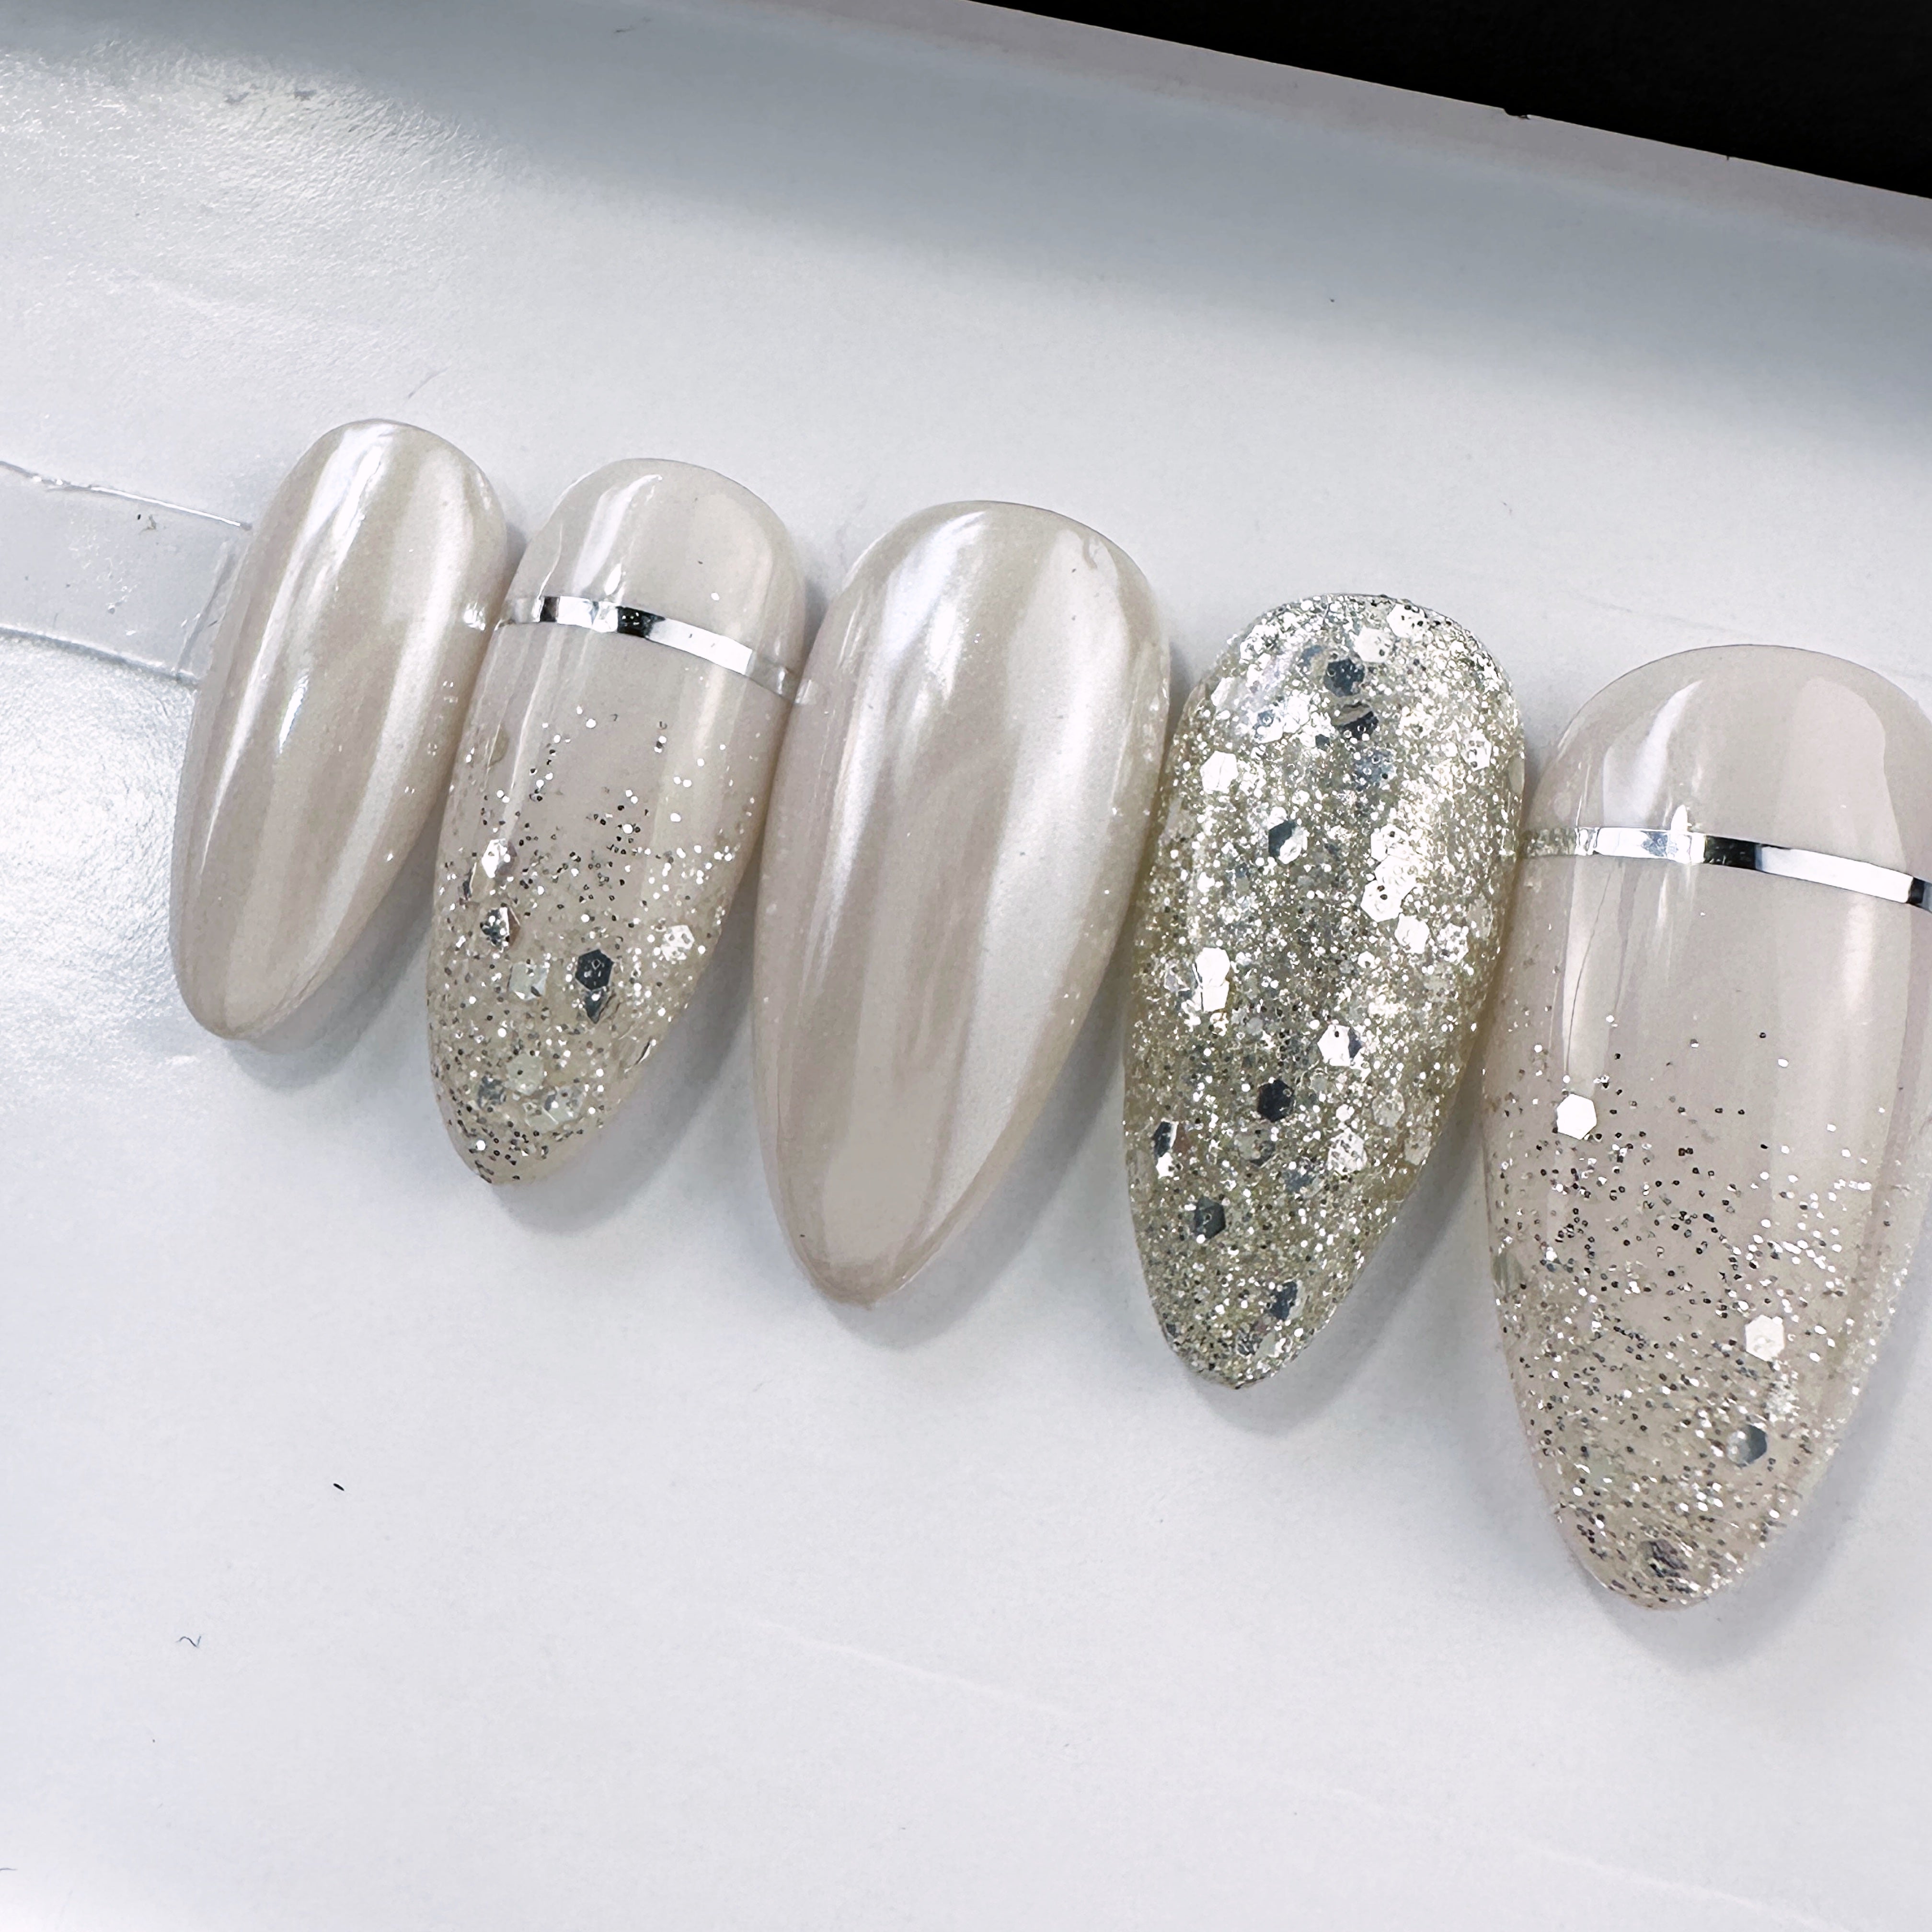 Handmade- Allure Metallic Gold or Sliver French Tip Press On Nails